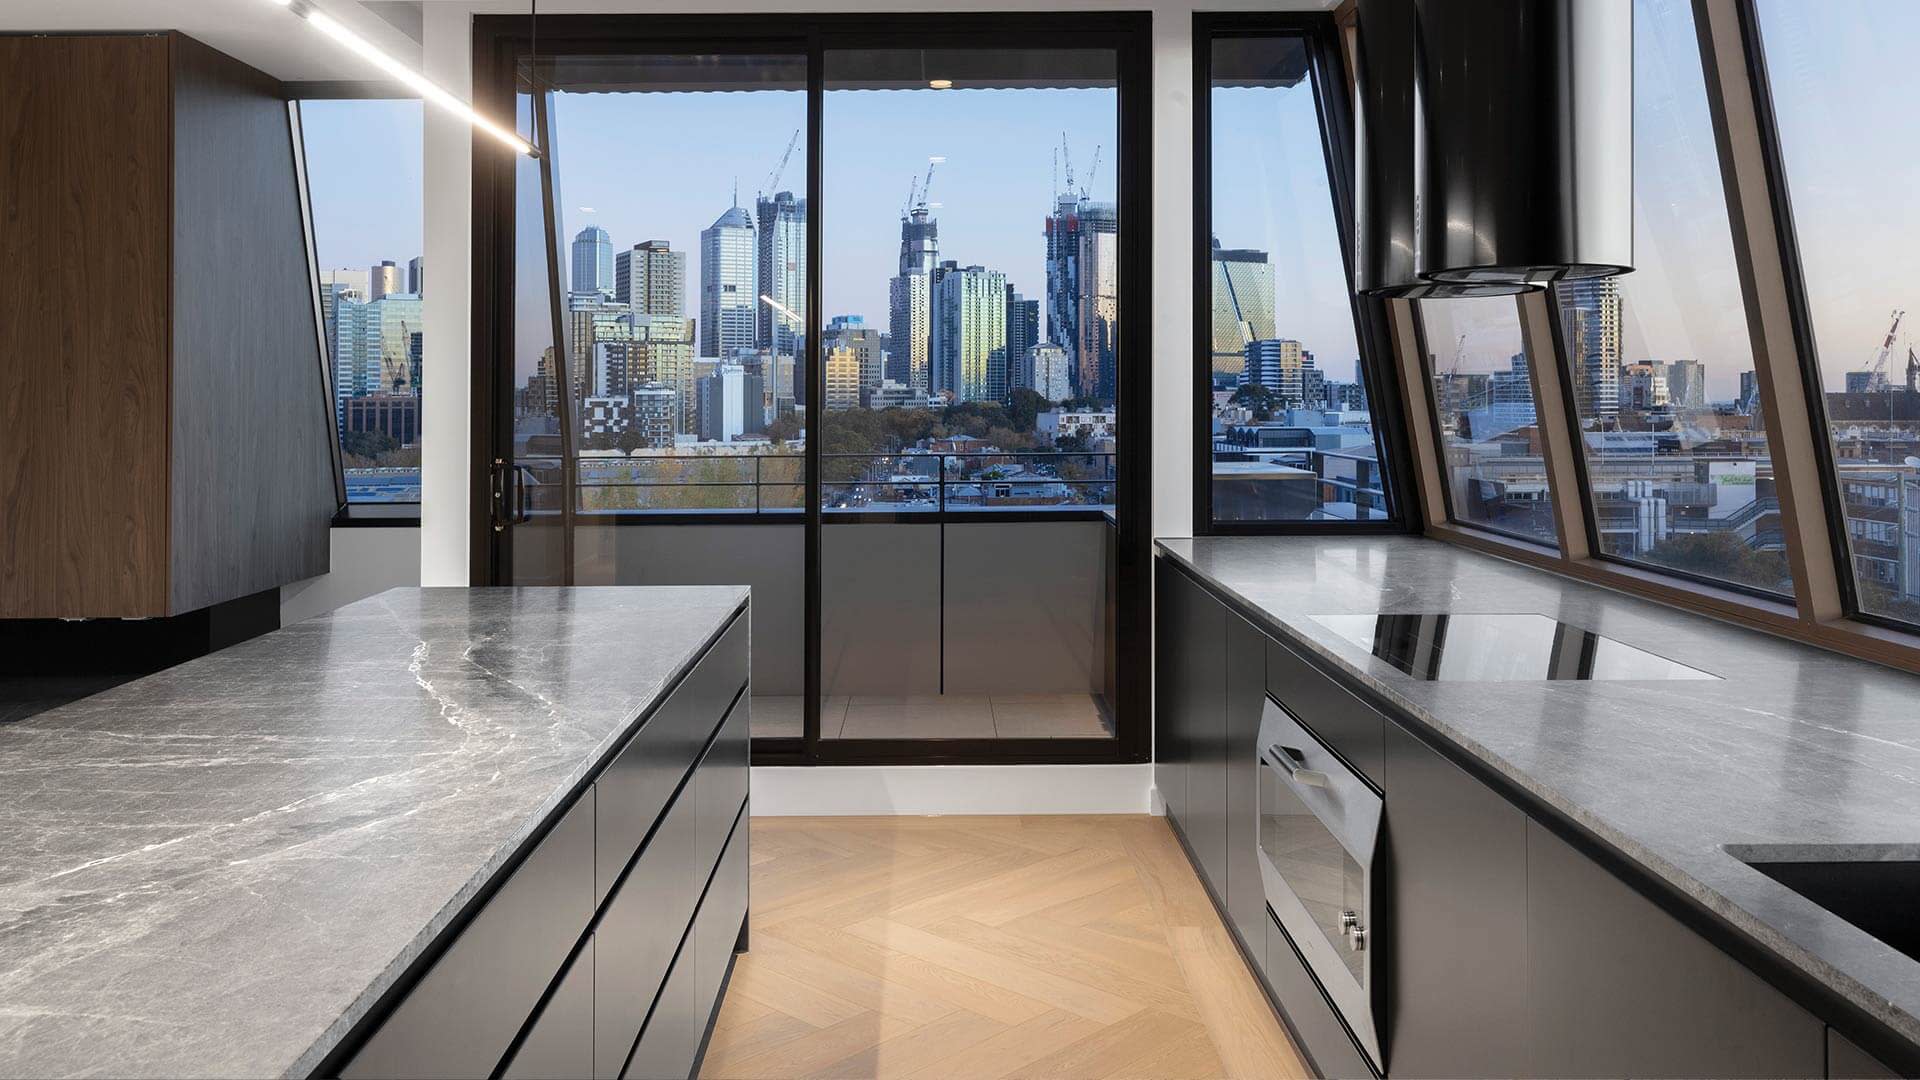 Minimal kitchen with a view of the city